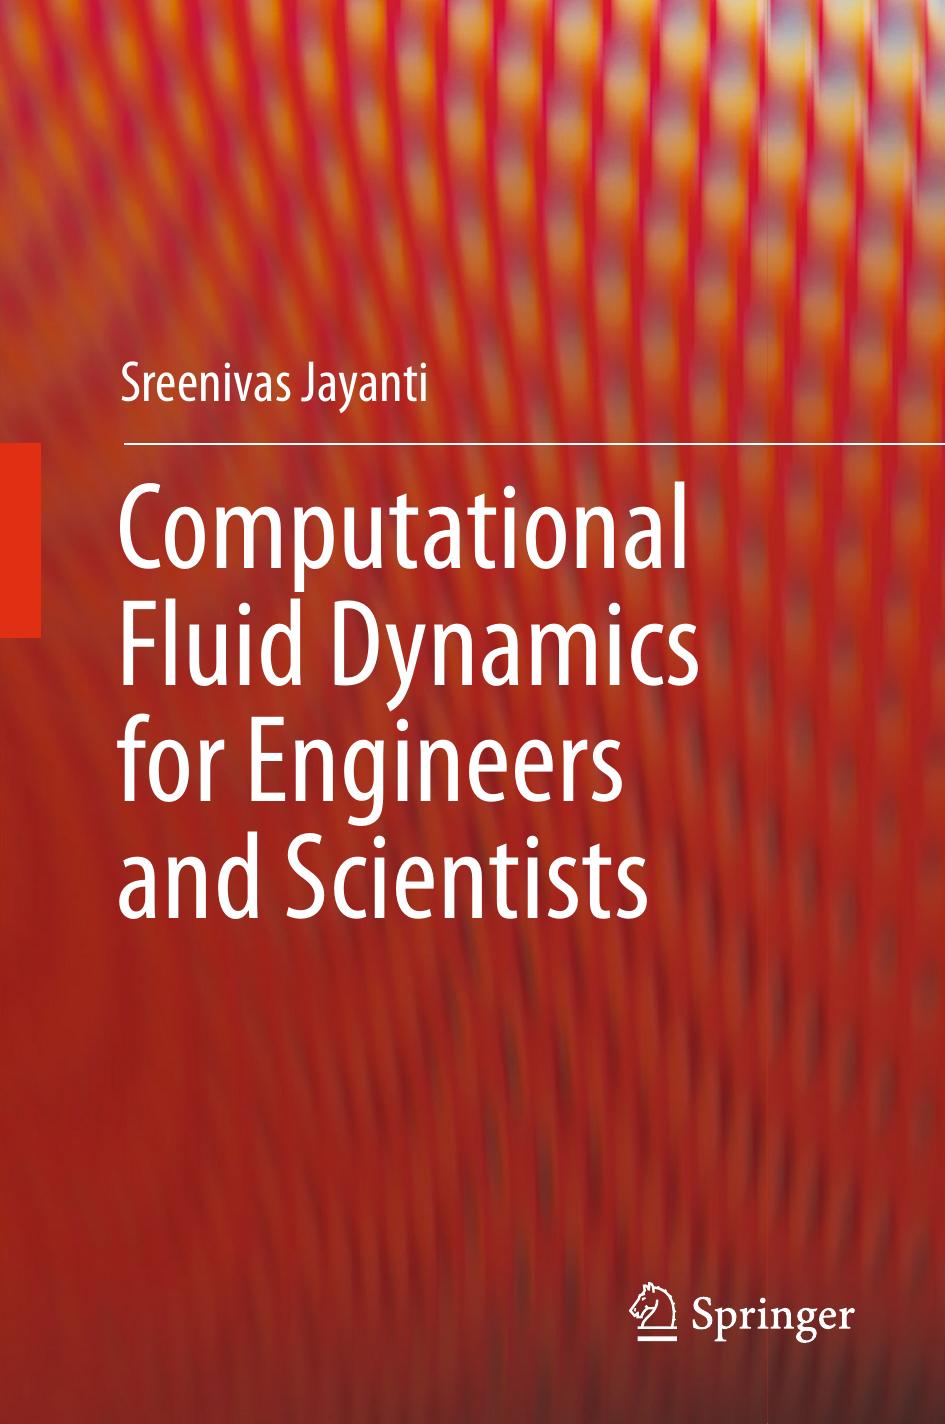 Computational Fluid Dynamics for Engineers and Scientists 2018